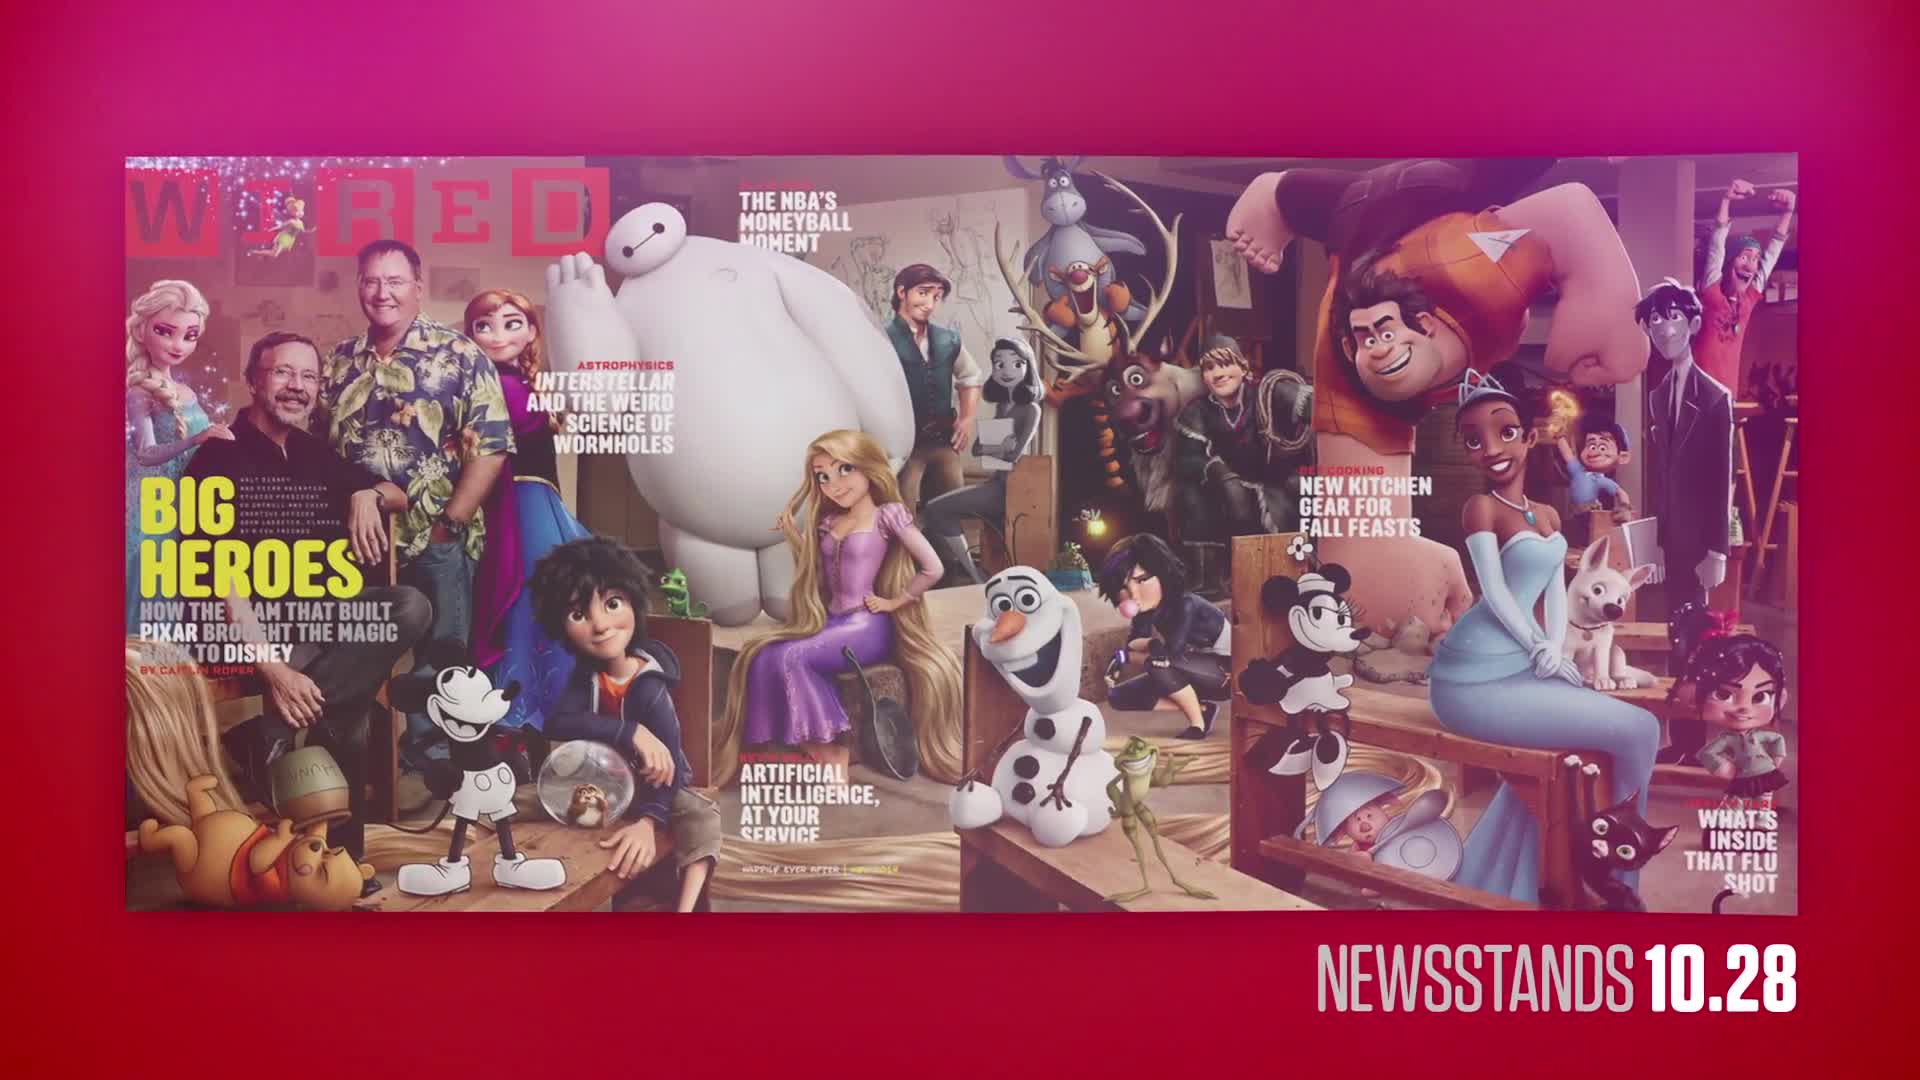 Watch WIRED - November 2014 - The Big Heroes of Disney Animation | WIRED